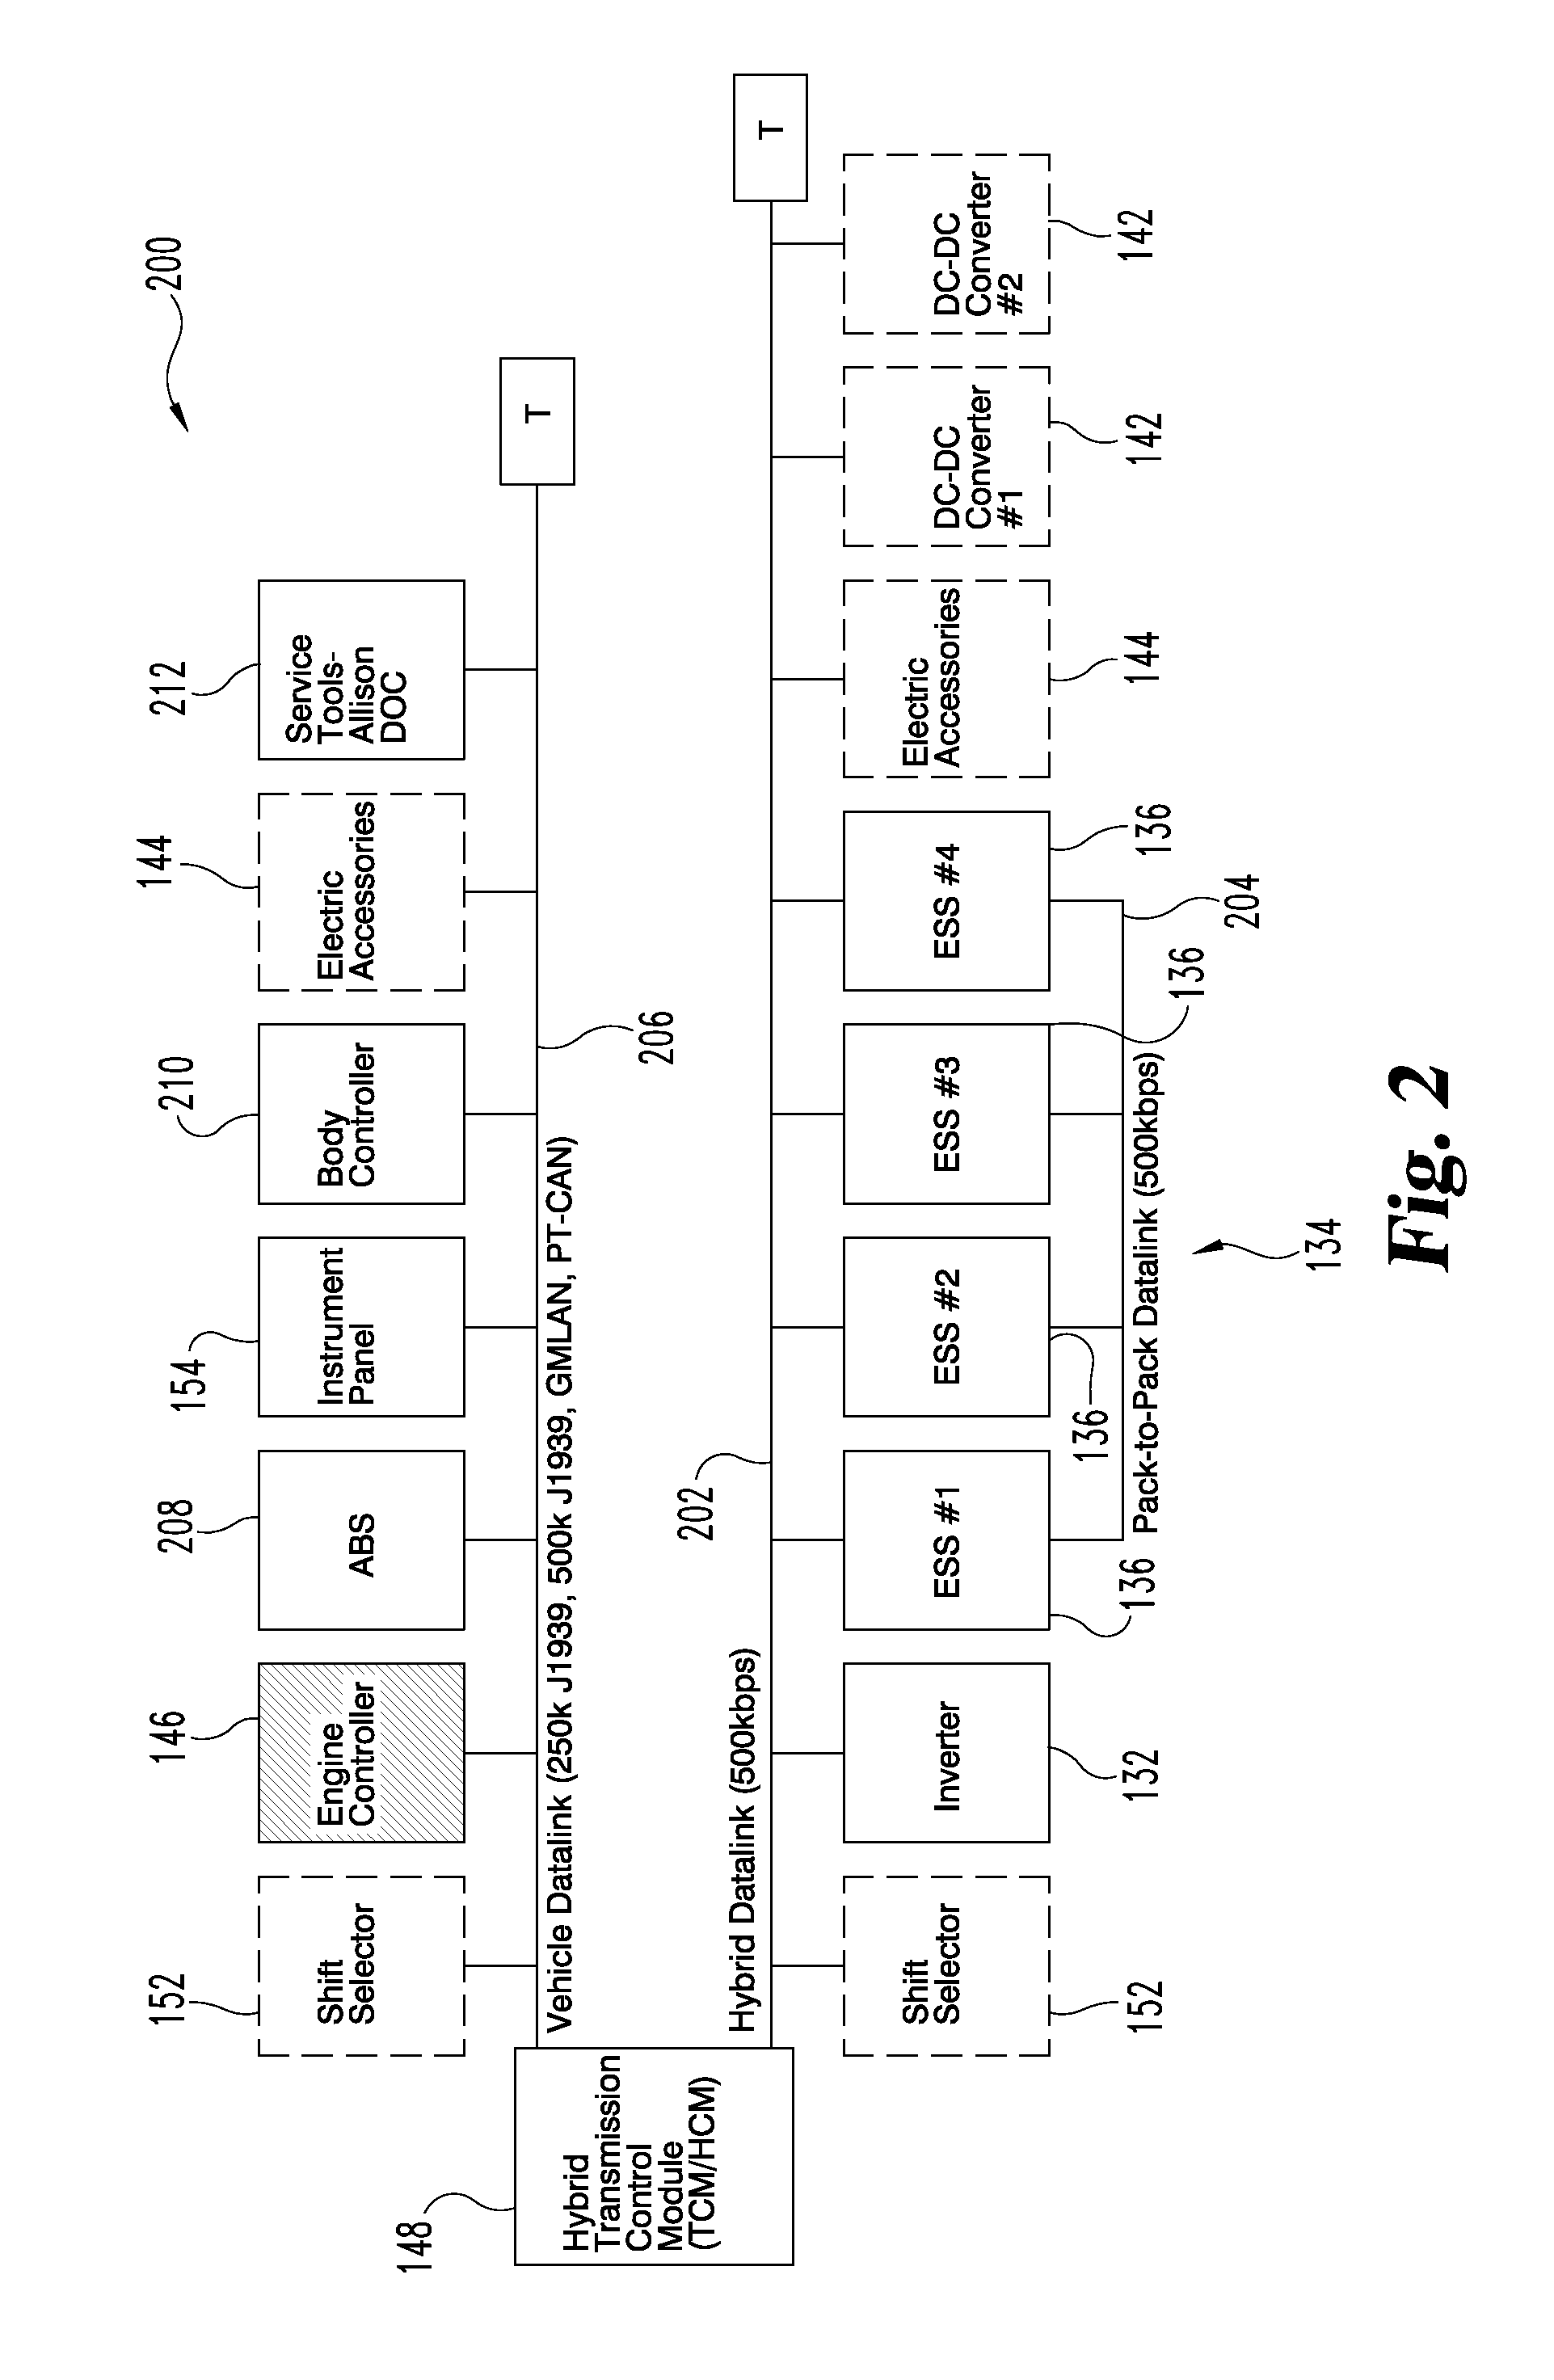 Service disconnect interlock system and method for hybrid vehicles